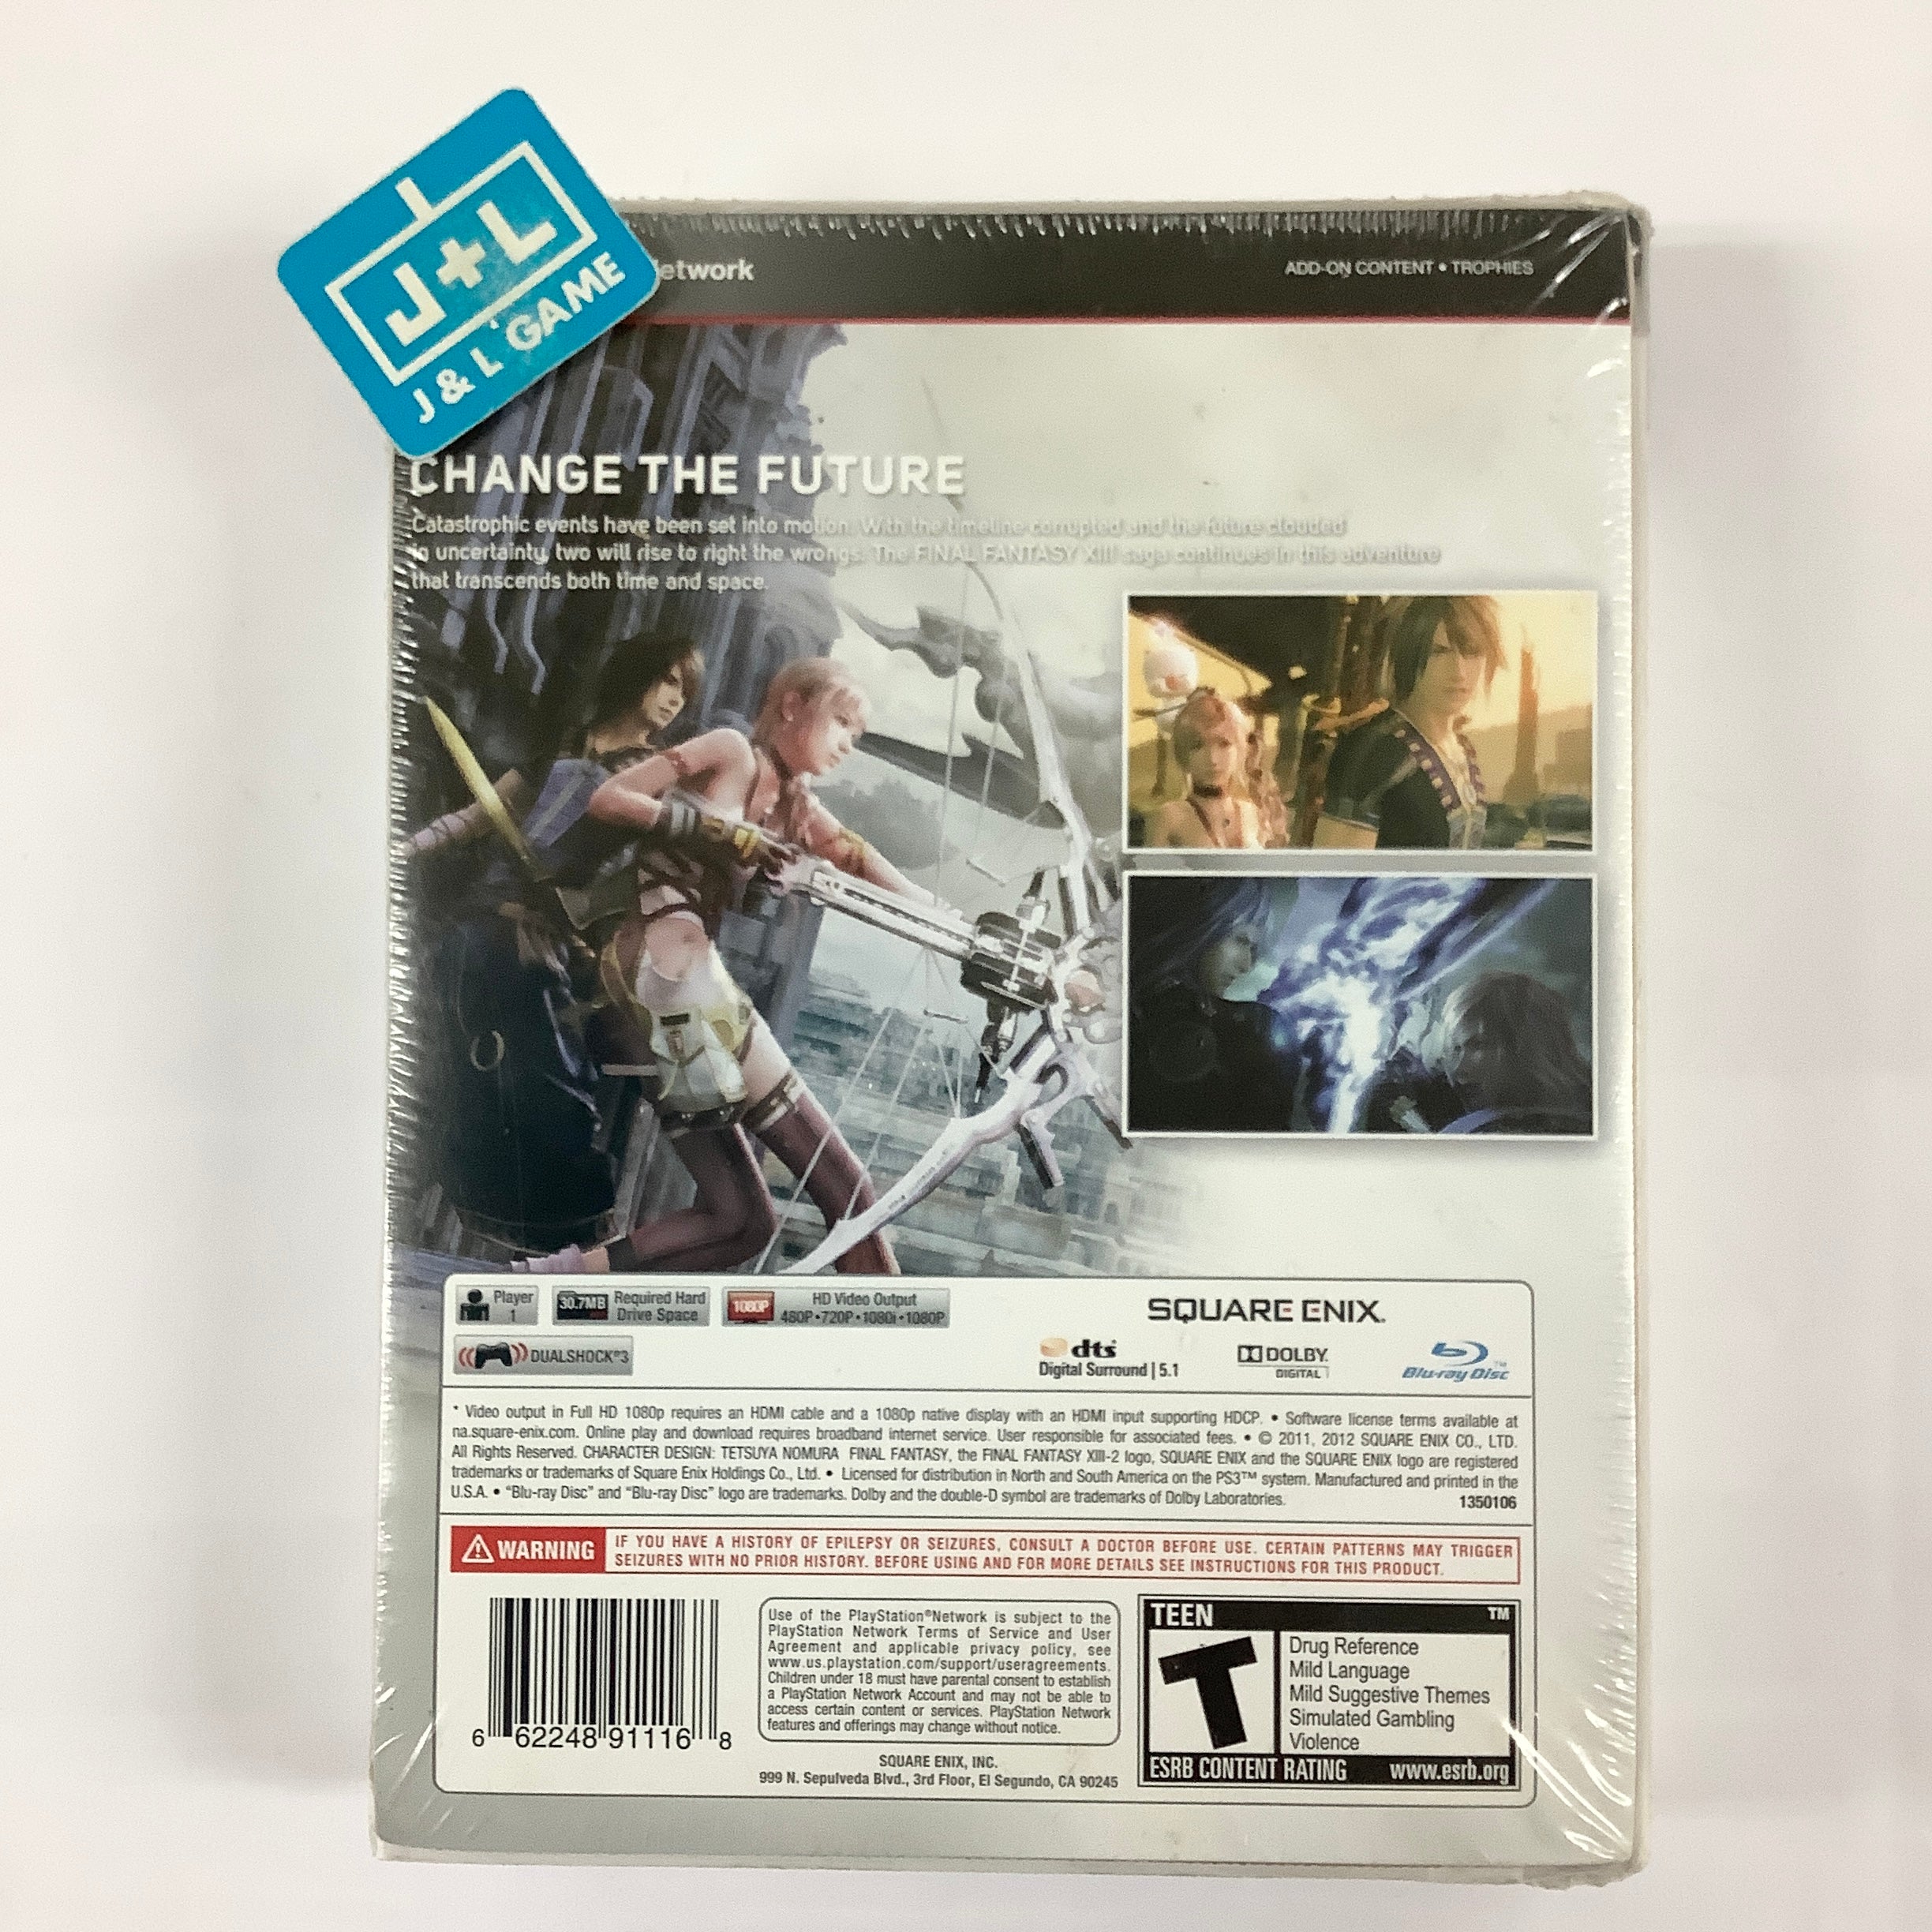 Final Fantasy XIII-2 (Limited Collector's Edition) - (PS3) PlayStation 3 Video Games Square Enix   